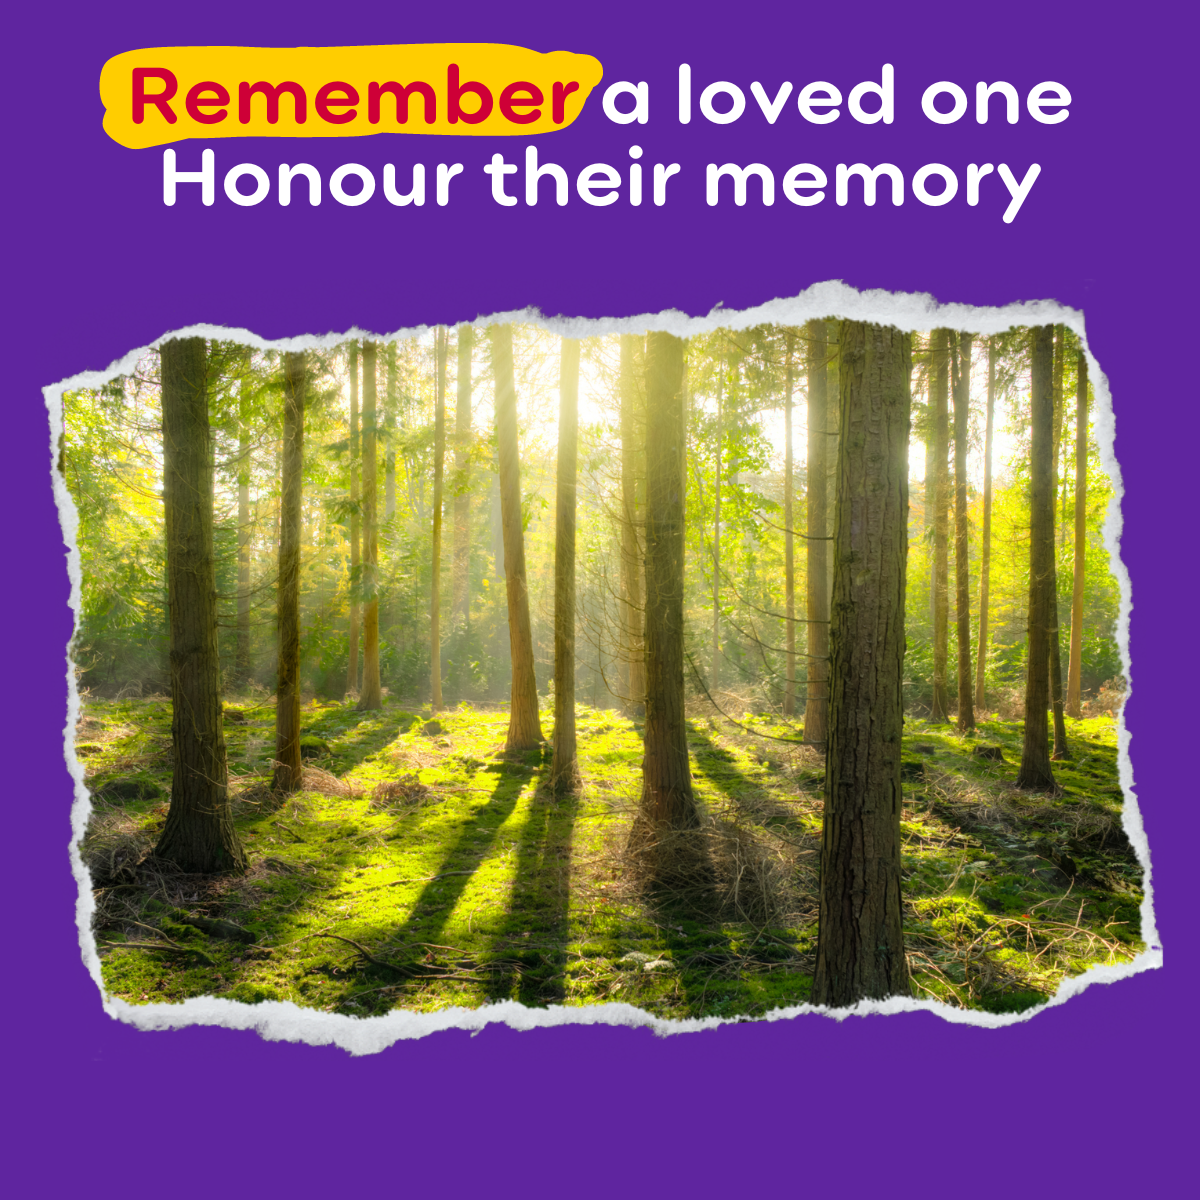 Remember a loved one, honour their memory